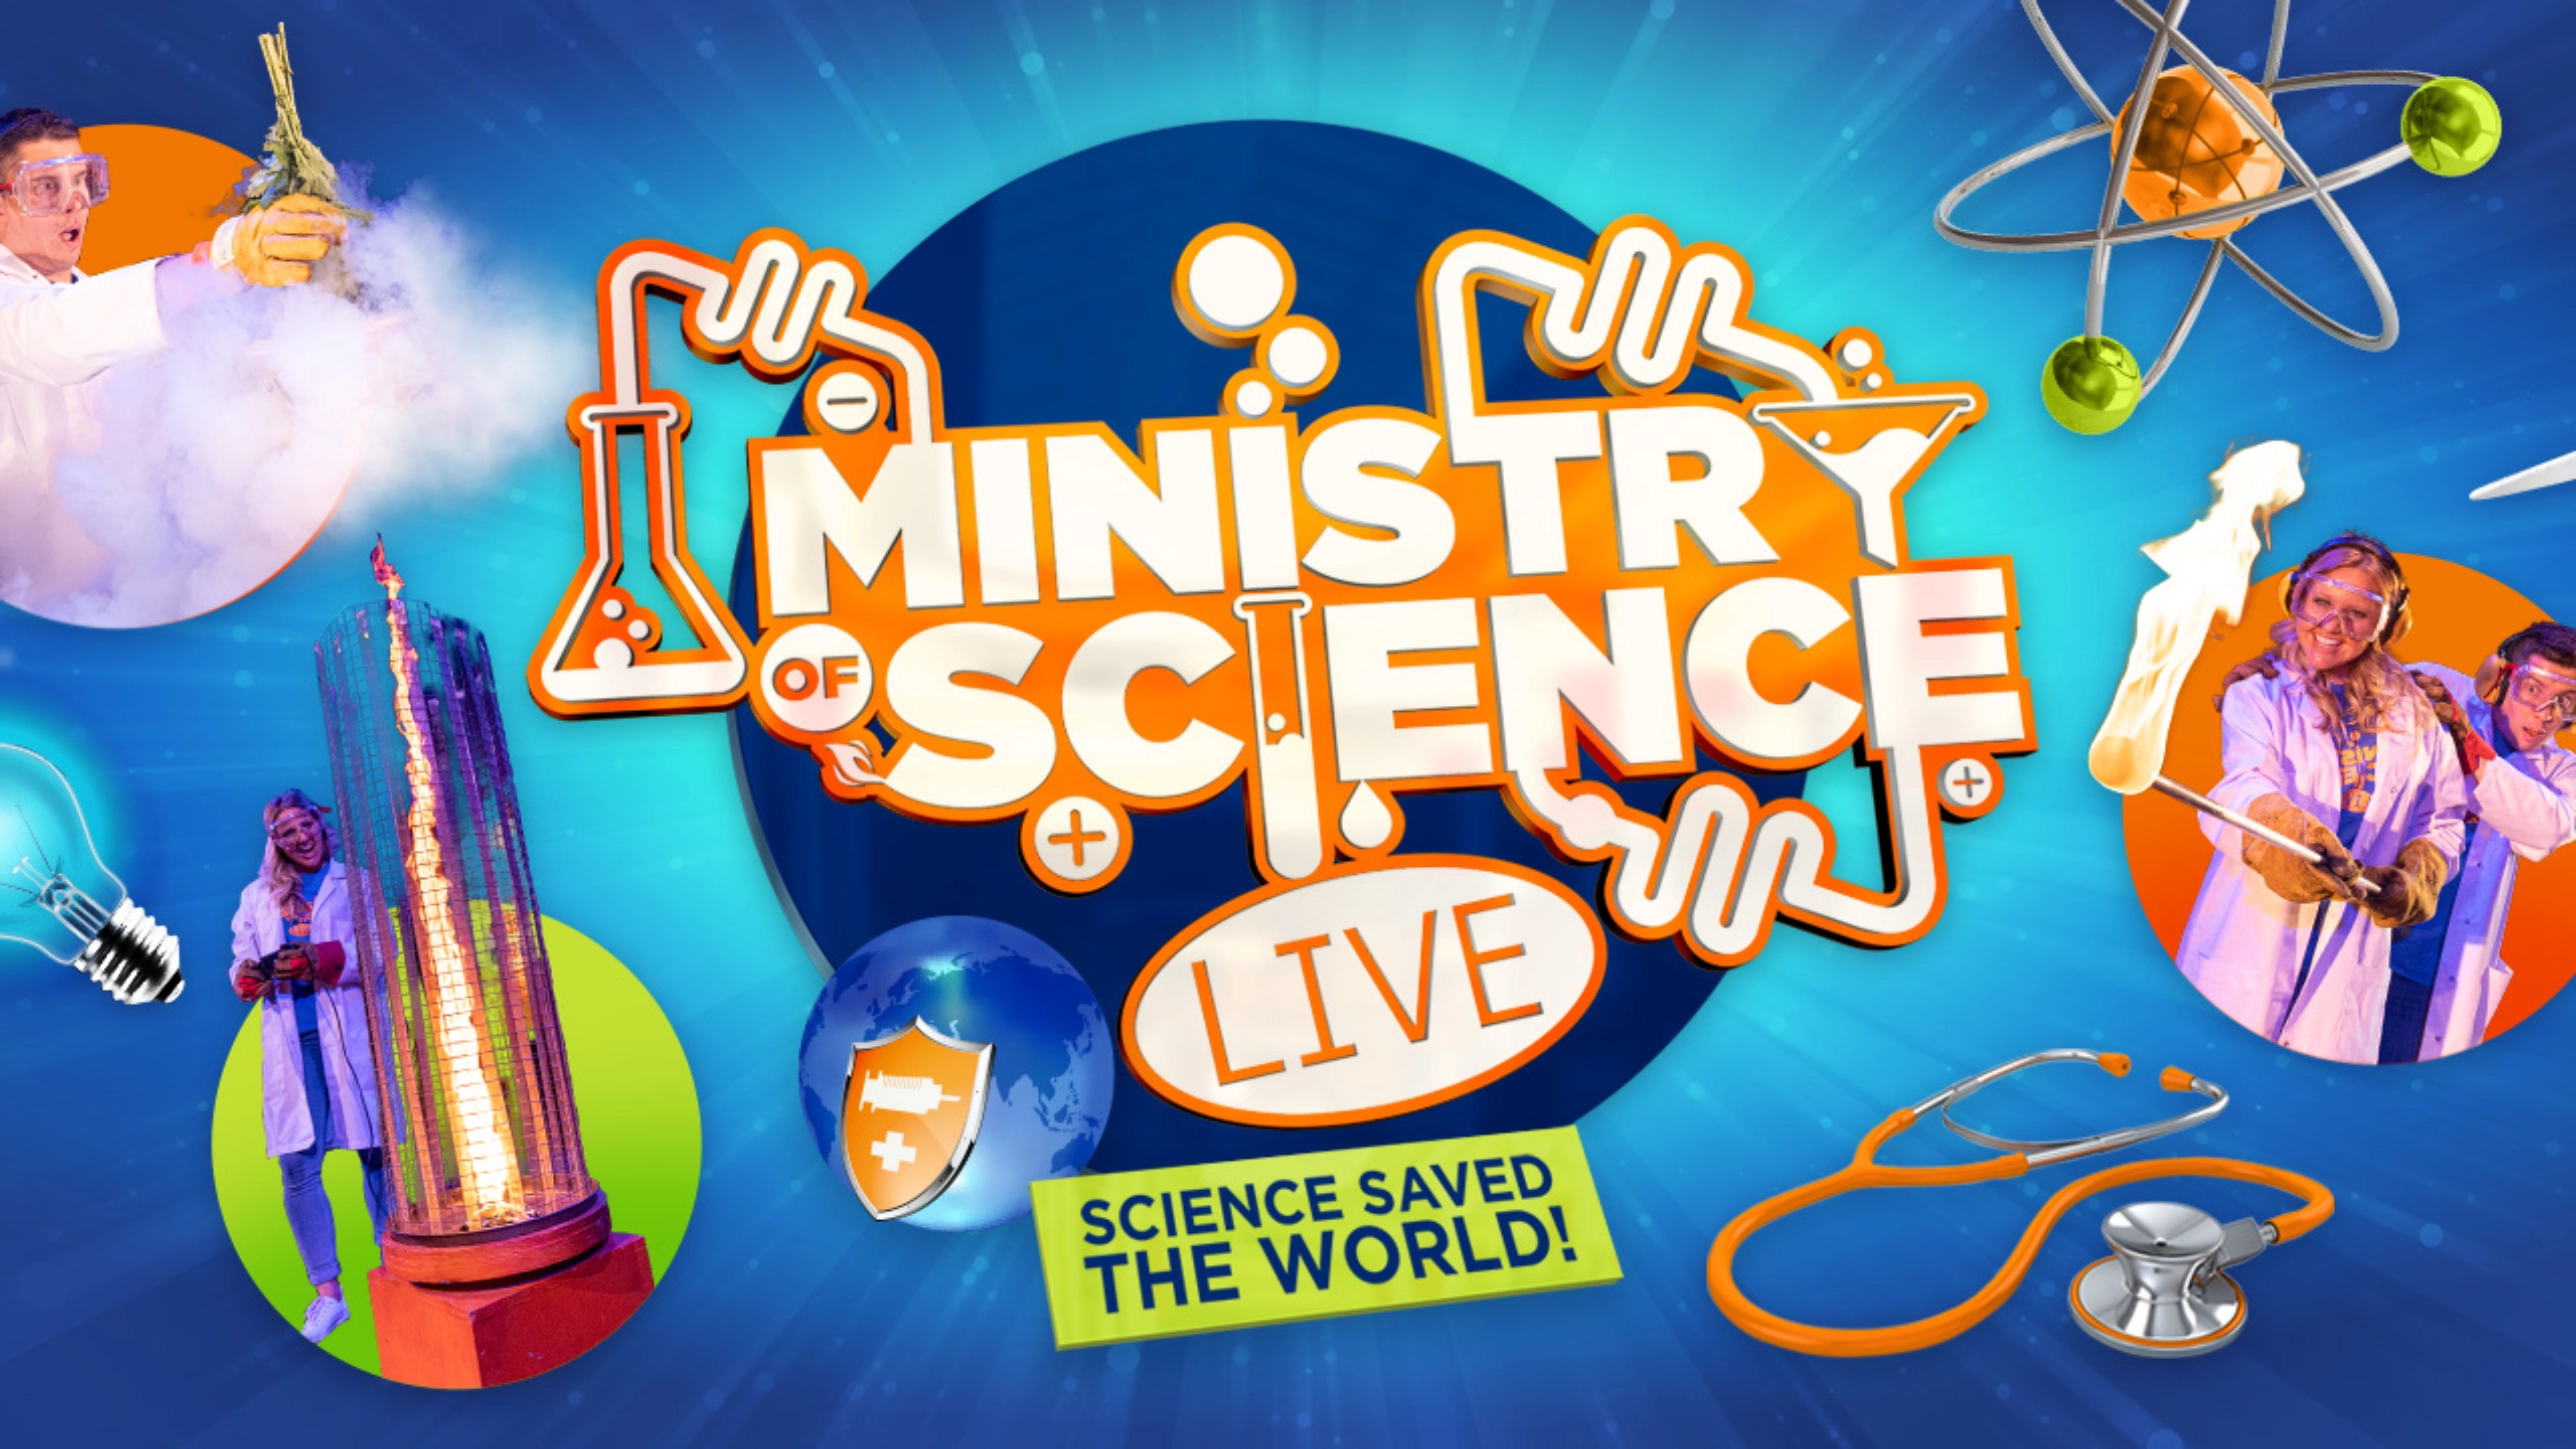 Ministry of Science Live! Science Saved the World